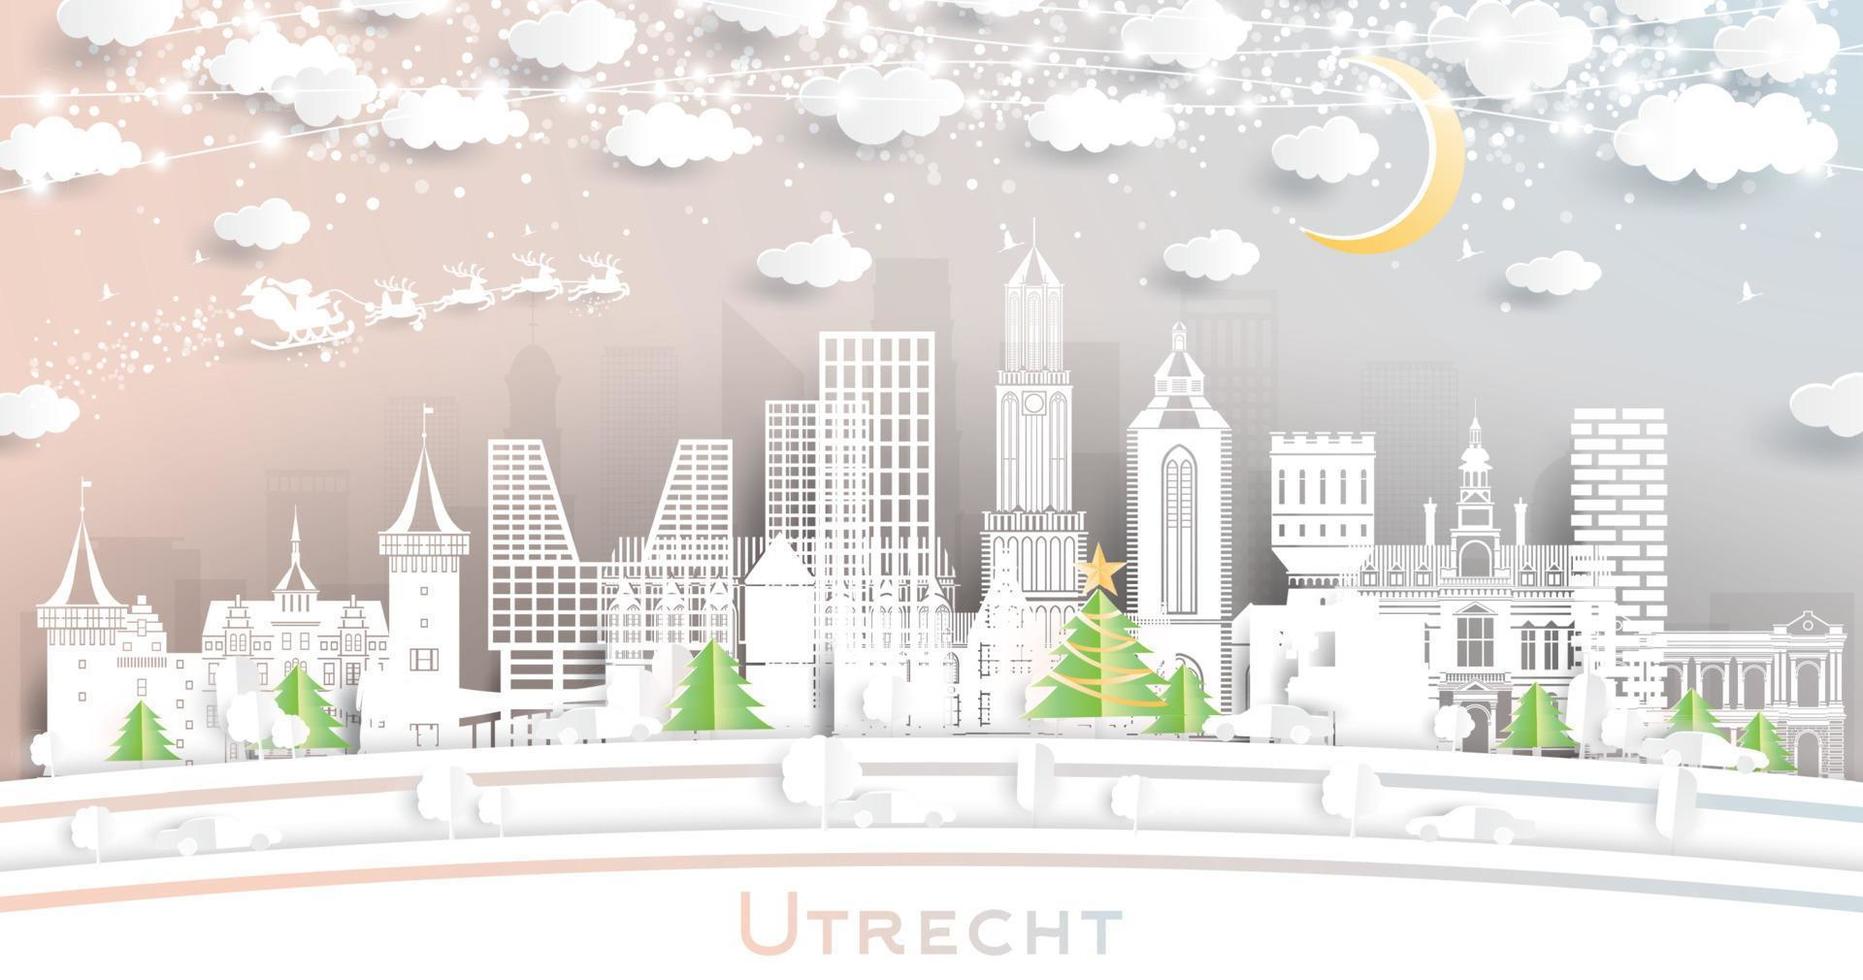 Utrecht Netherlands City Skyline in Paper Cut Style with Snowflakes, Moon and Neon Garland. vector